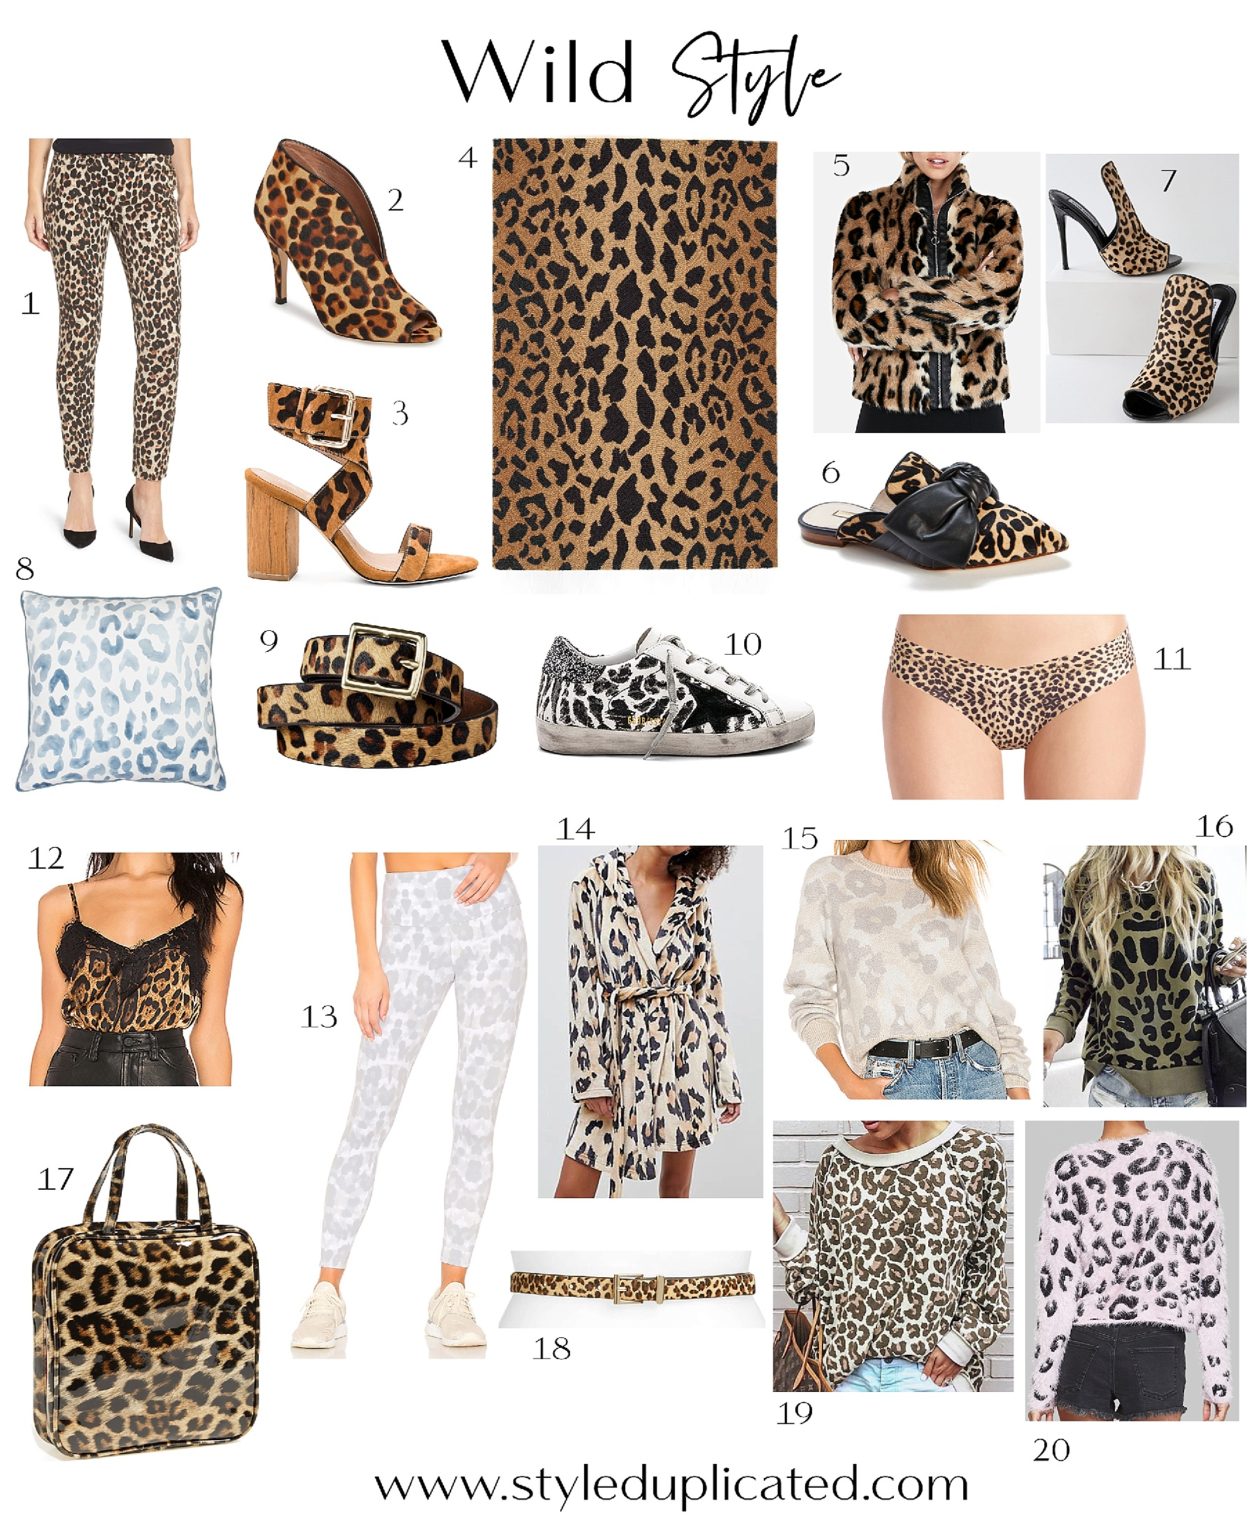 Leopard is Taking Over! - Style Duplicated